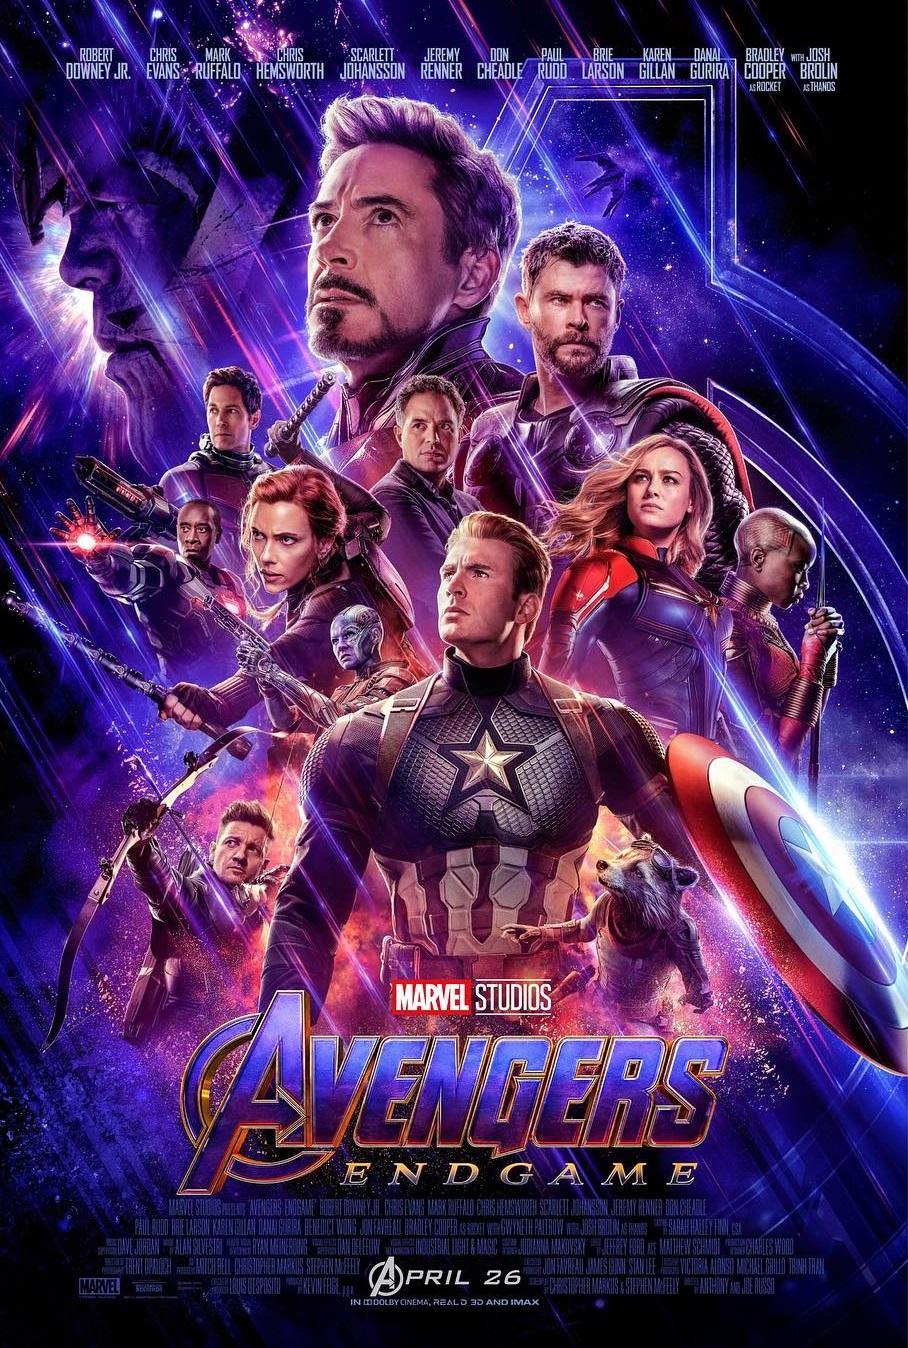 Avengers: Endgame Box Office: The MCU film is inches away from dethroning Avatar as the most successful film